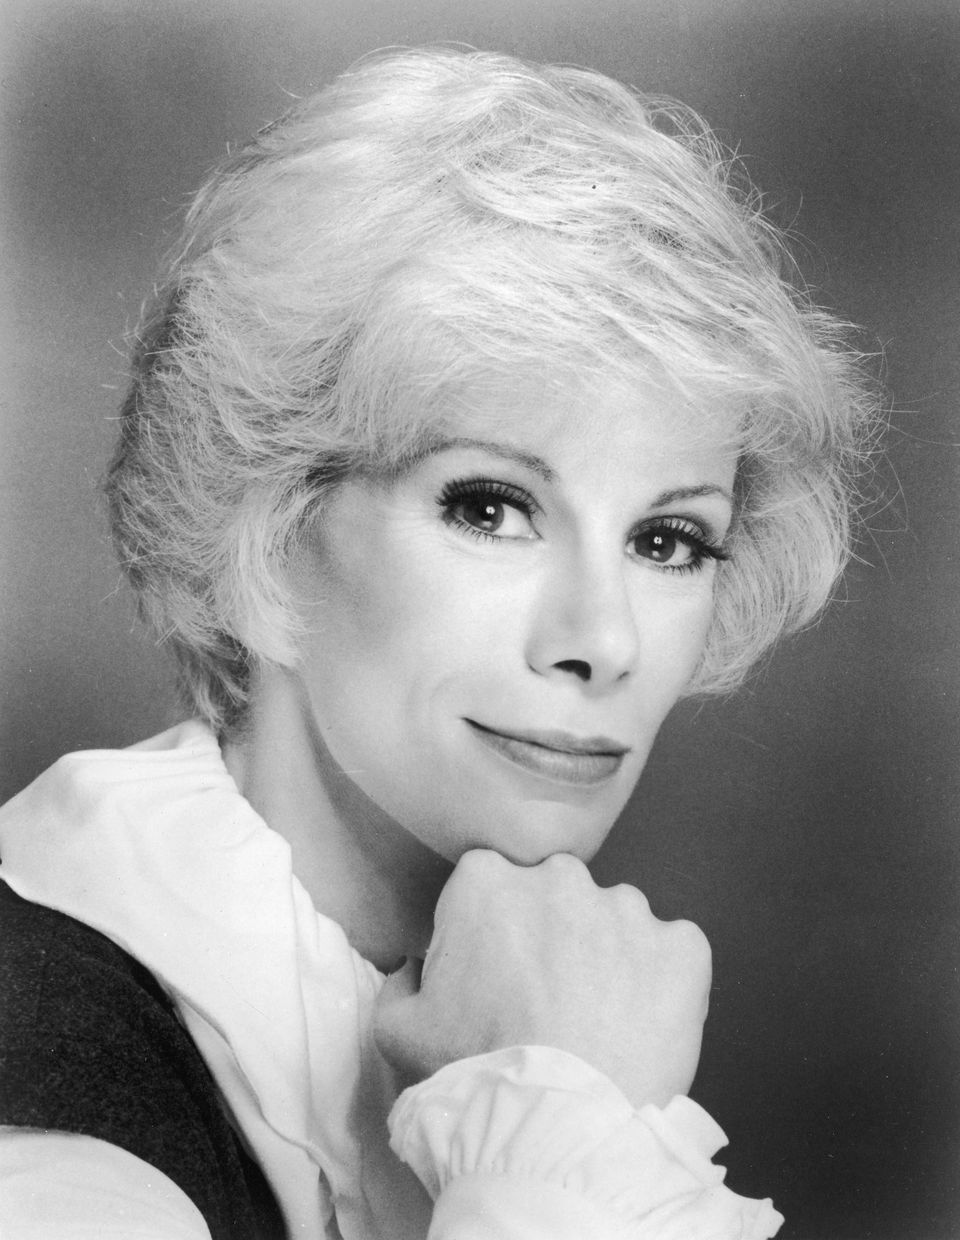 "<a href="http://www.theguardian.com/stage/2012/aug/09/comedy-gold-joan-rivers" role="link" class=" js-entry-link cet-external-link" data-vars-item-name="I hate thin people" data-vars-item-type="text" data-vars-unit-name="60d19682e4b048c106102387" data-vars-unit-type="buzz_body" data-vars-target-content-id="http://www.theguardian.com/stage/2012/aug/09/comedy-gold-joan-rivers" data-vars-target-content-type="url" data-vars-type="web_external_link" data-vars-subunit-name="before_you_go_slideshow" data-vars-subunit-type="component" data-vars-position-in-subunit="0">I hate thin people</a>; 'Oh, does the tampon make me look fat?'"